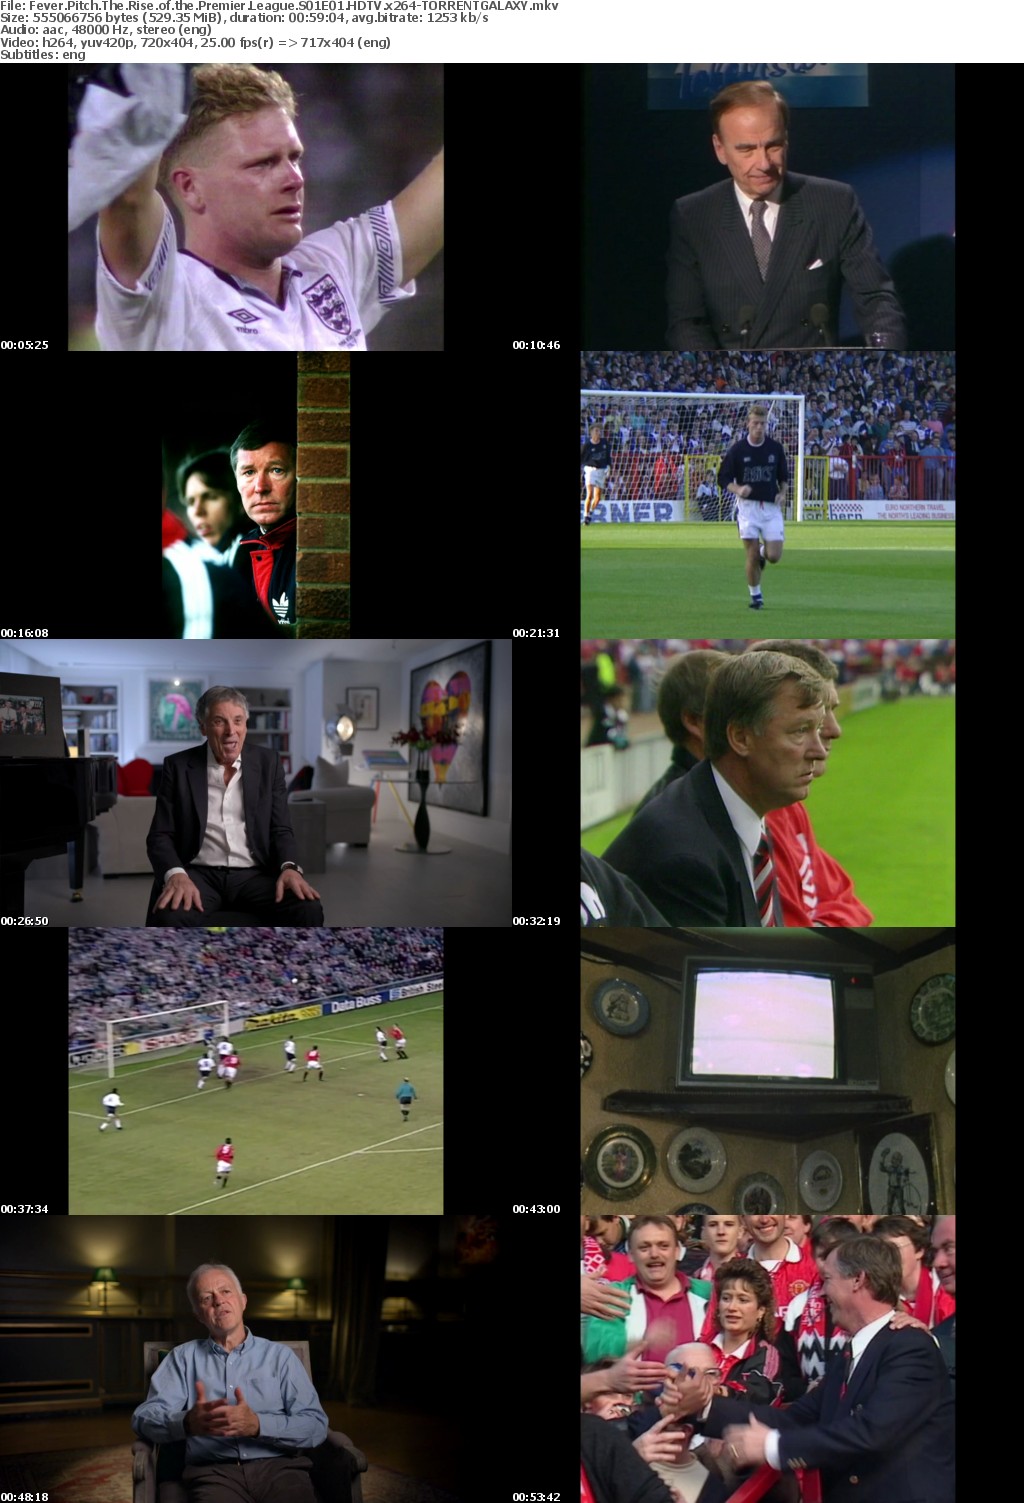 Fever Pitch The Rise of the Premier League S01E01 HDTV x264-GALAXY